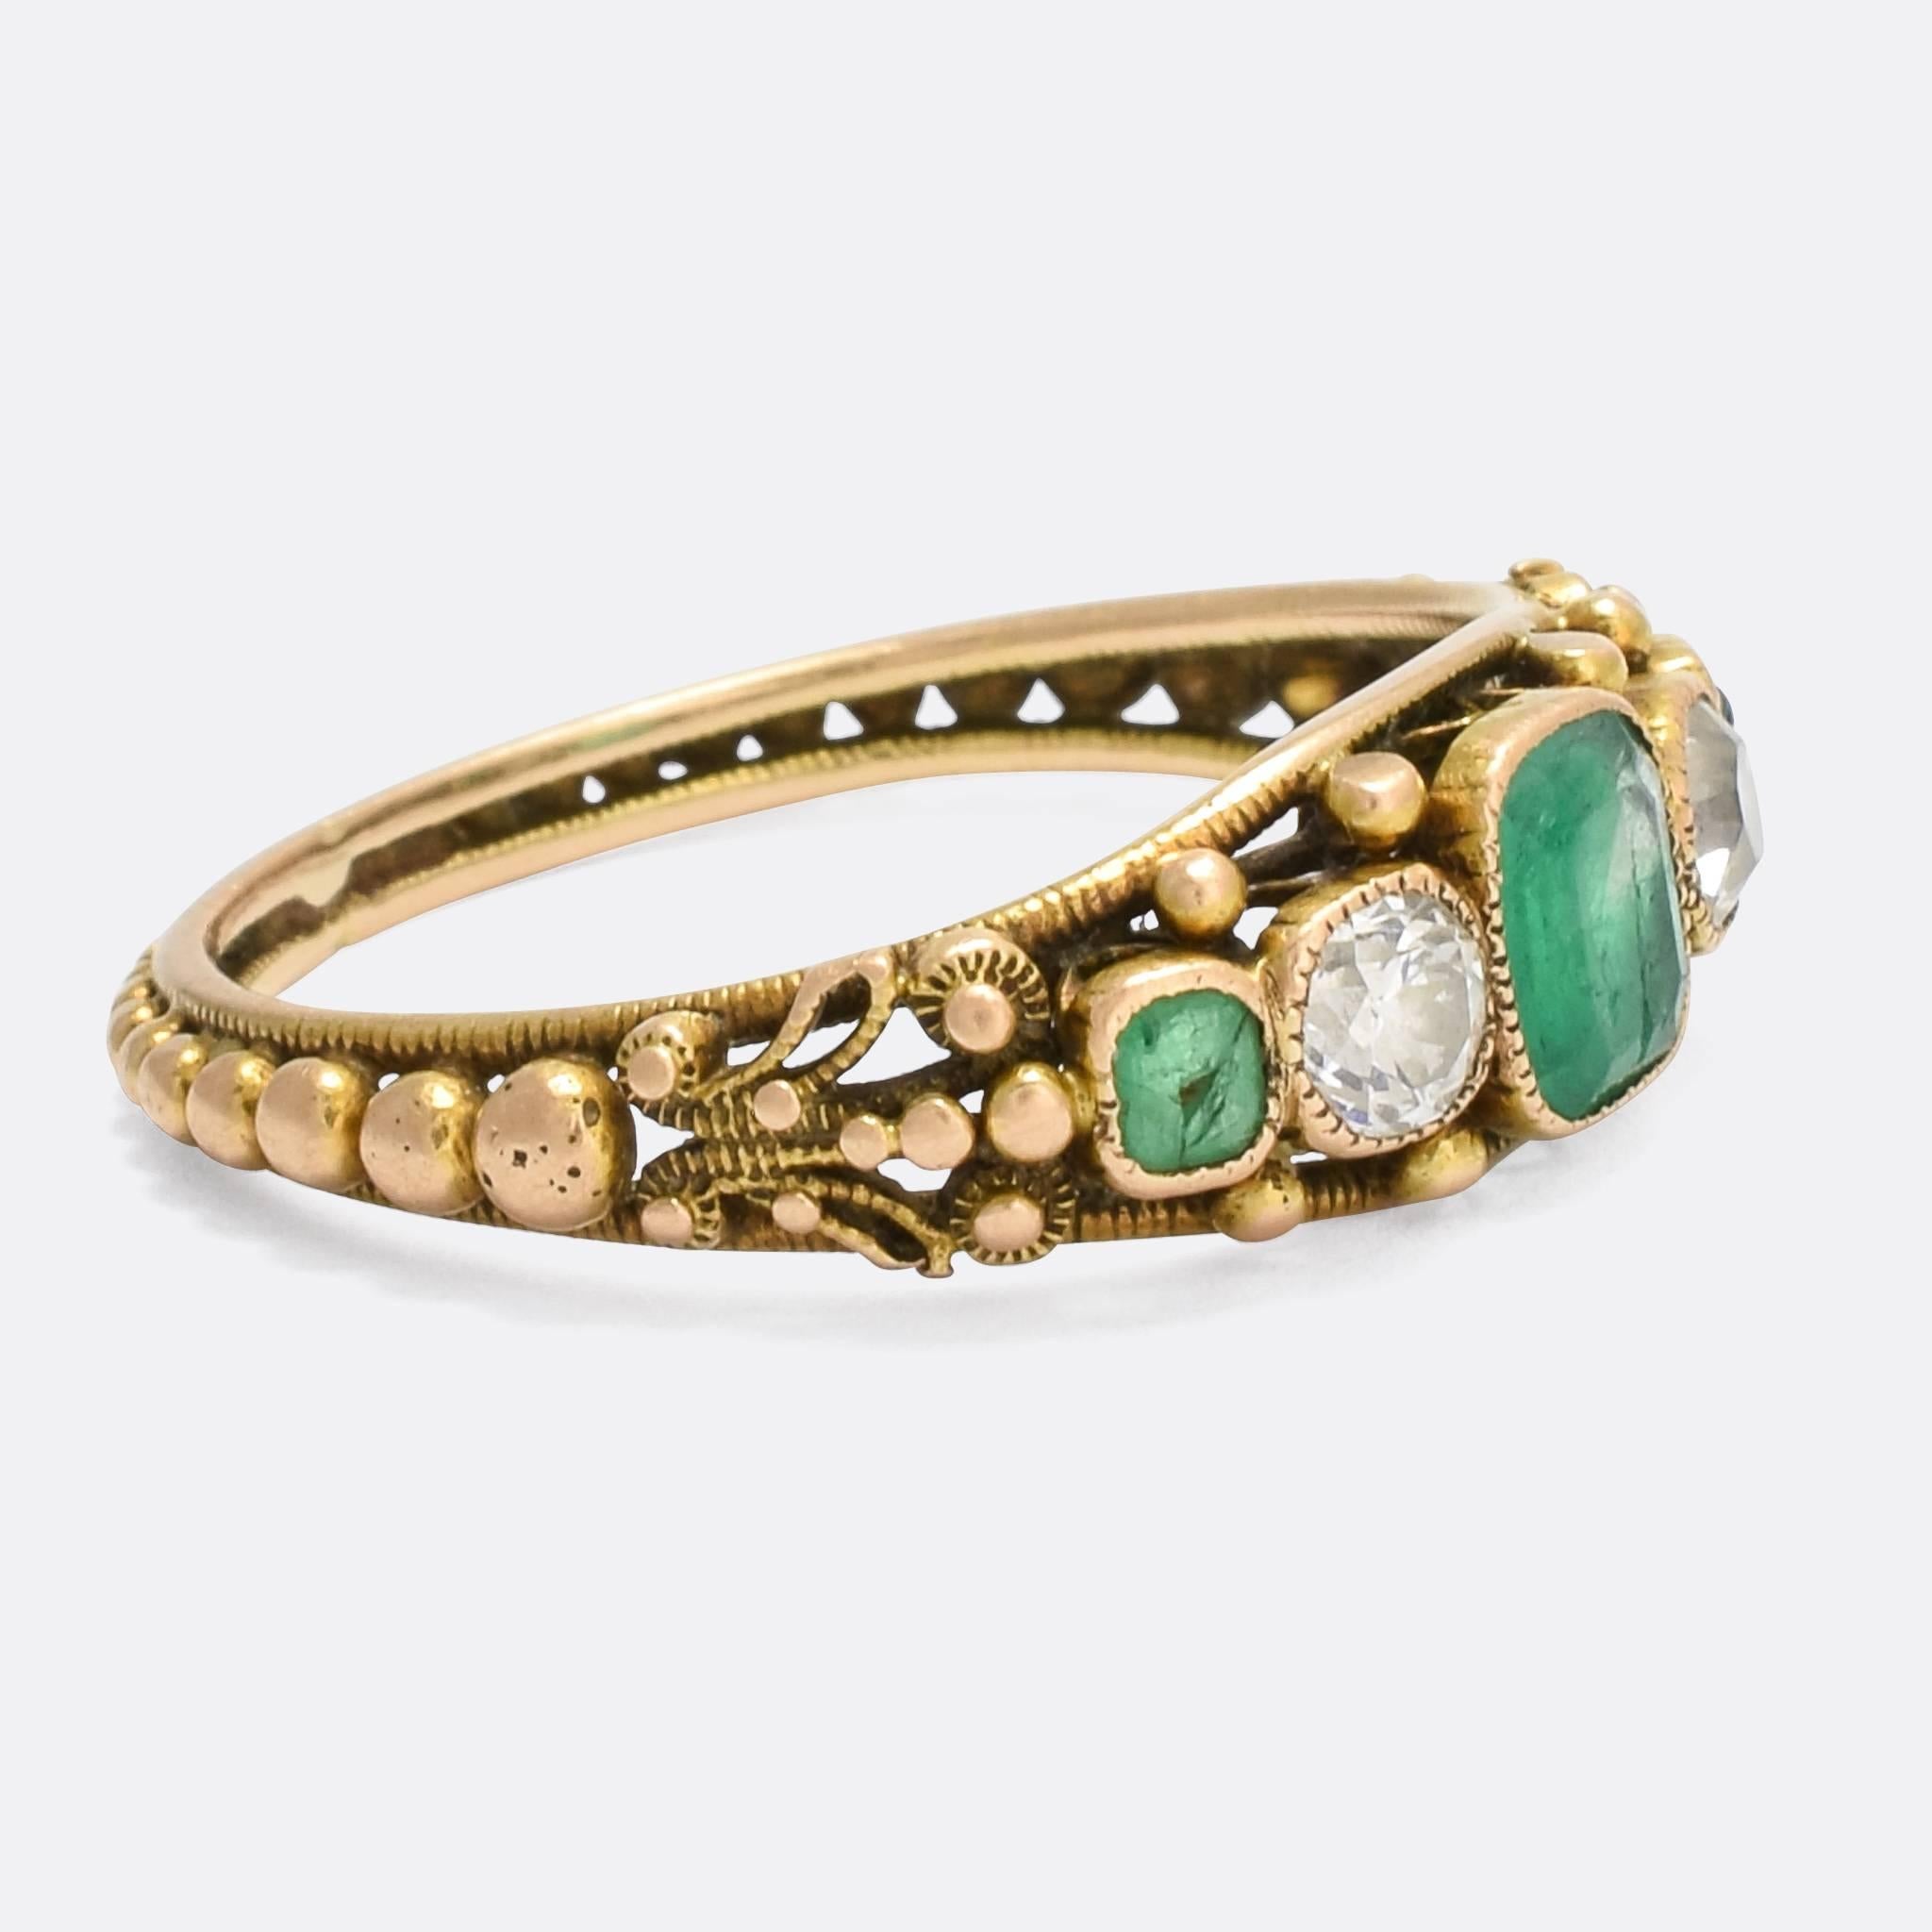 A stunning Georgian Regency Period five-stone ring set with natural emeralds and old mine cut diamonds. The craftsmanship is exceptional, with applied filigree detailing and graduated pommels around the band. Modelled in 15k gold throughout, it